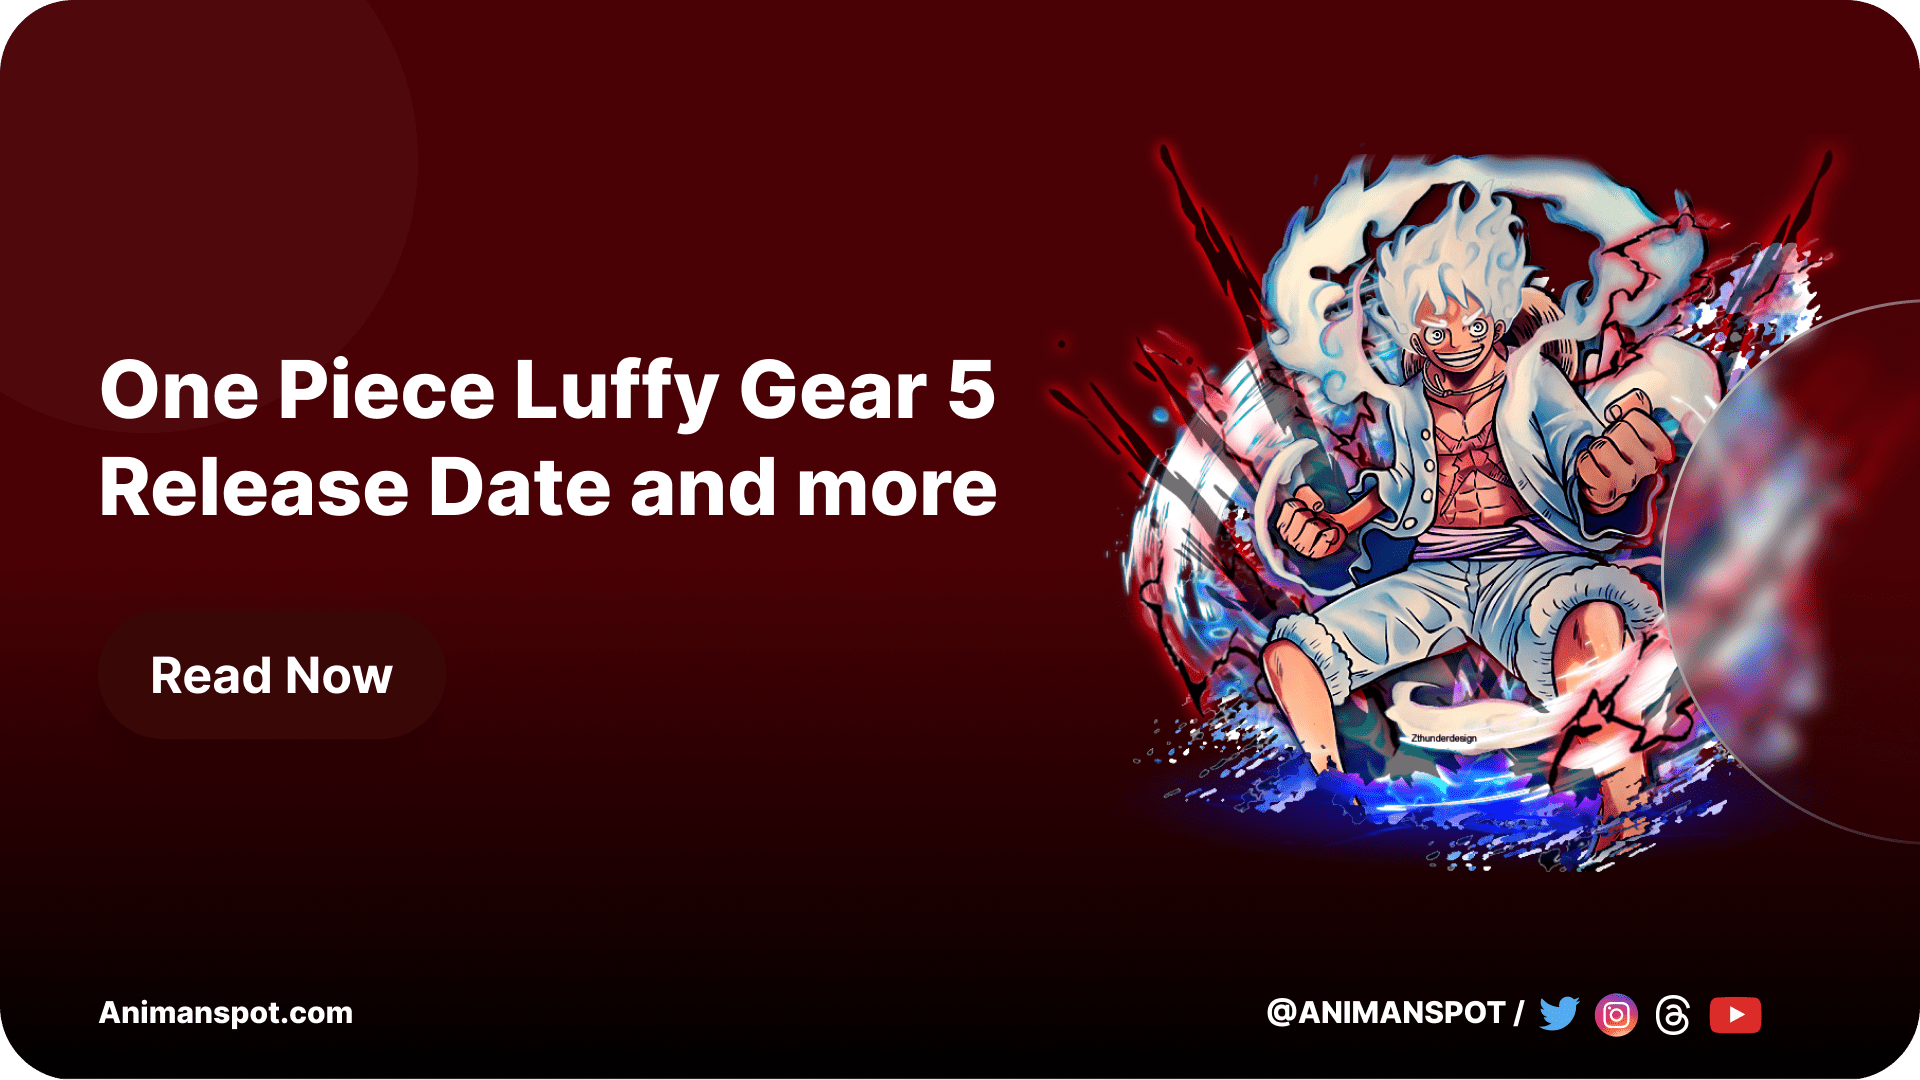 an image of luffy's gear5 with text one piece luffy gear 5 release date and more